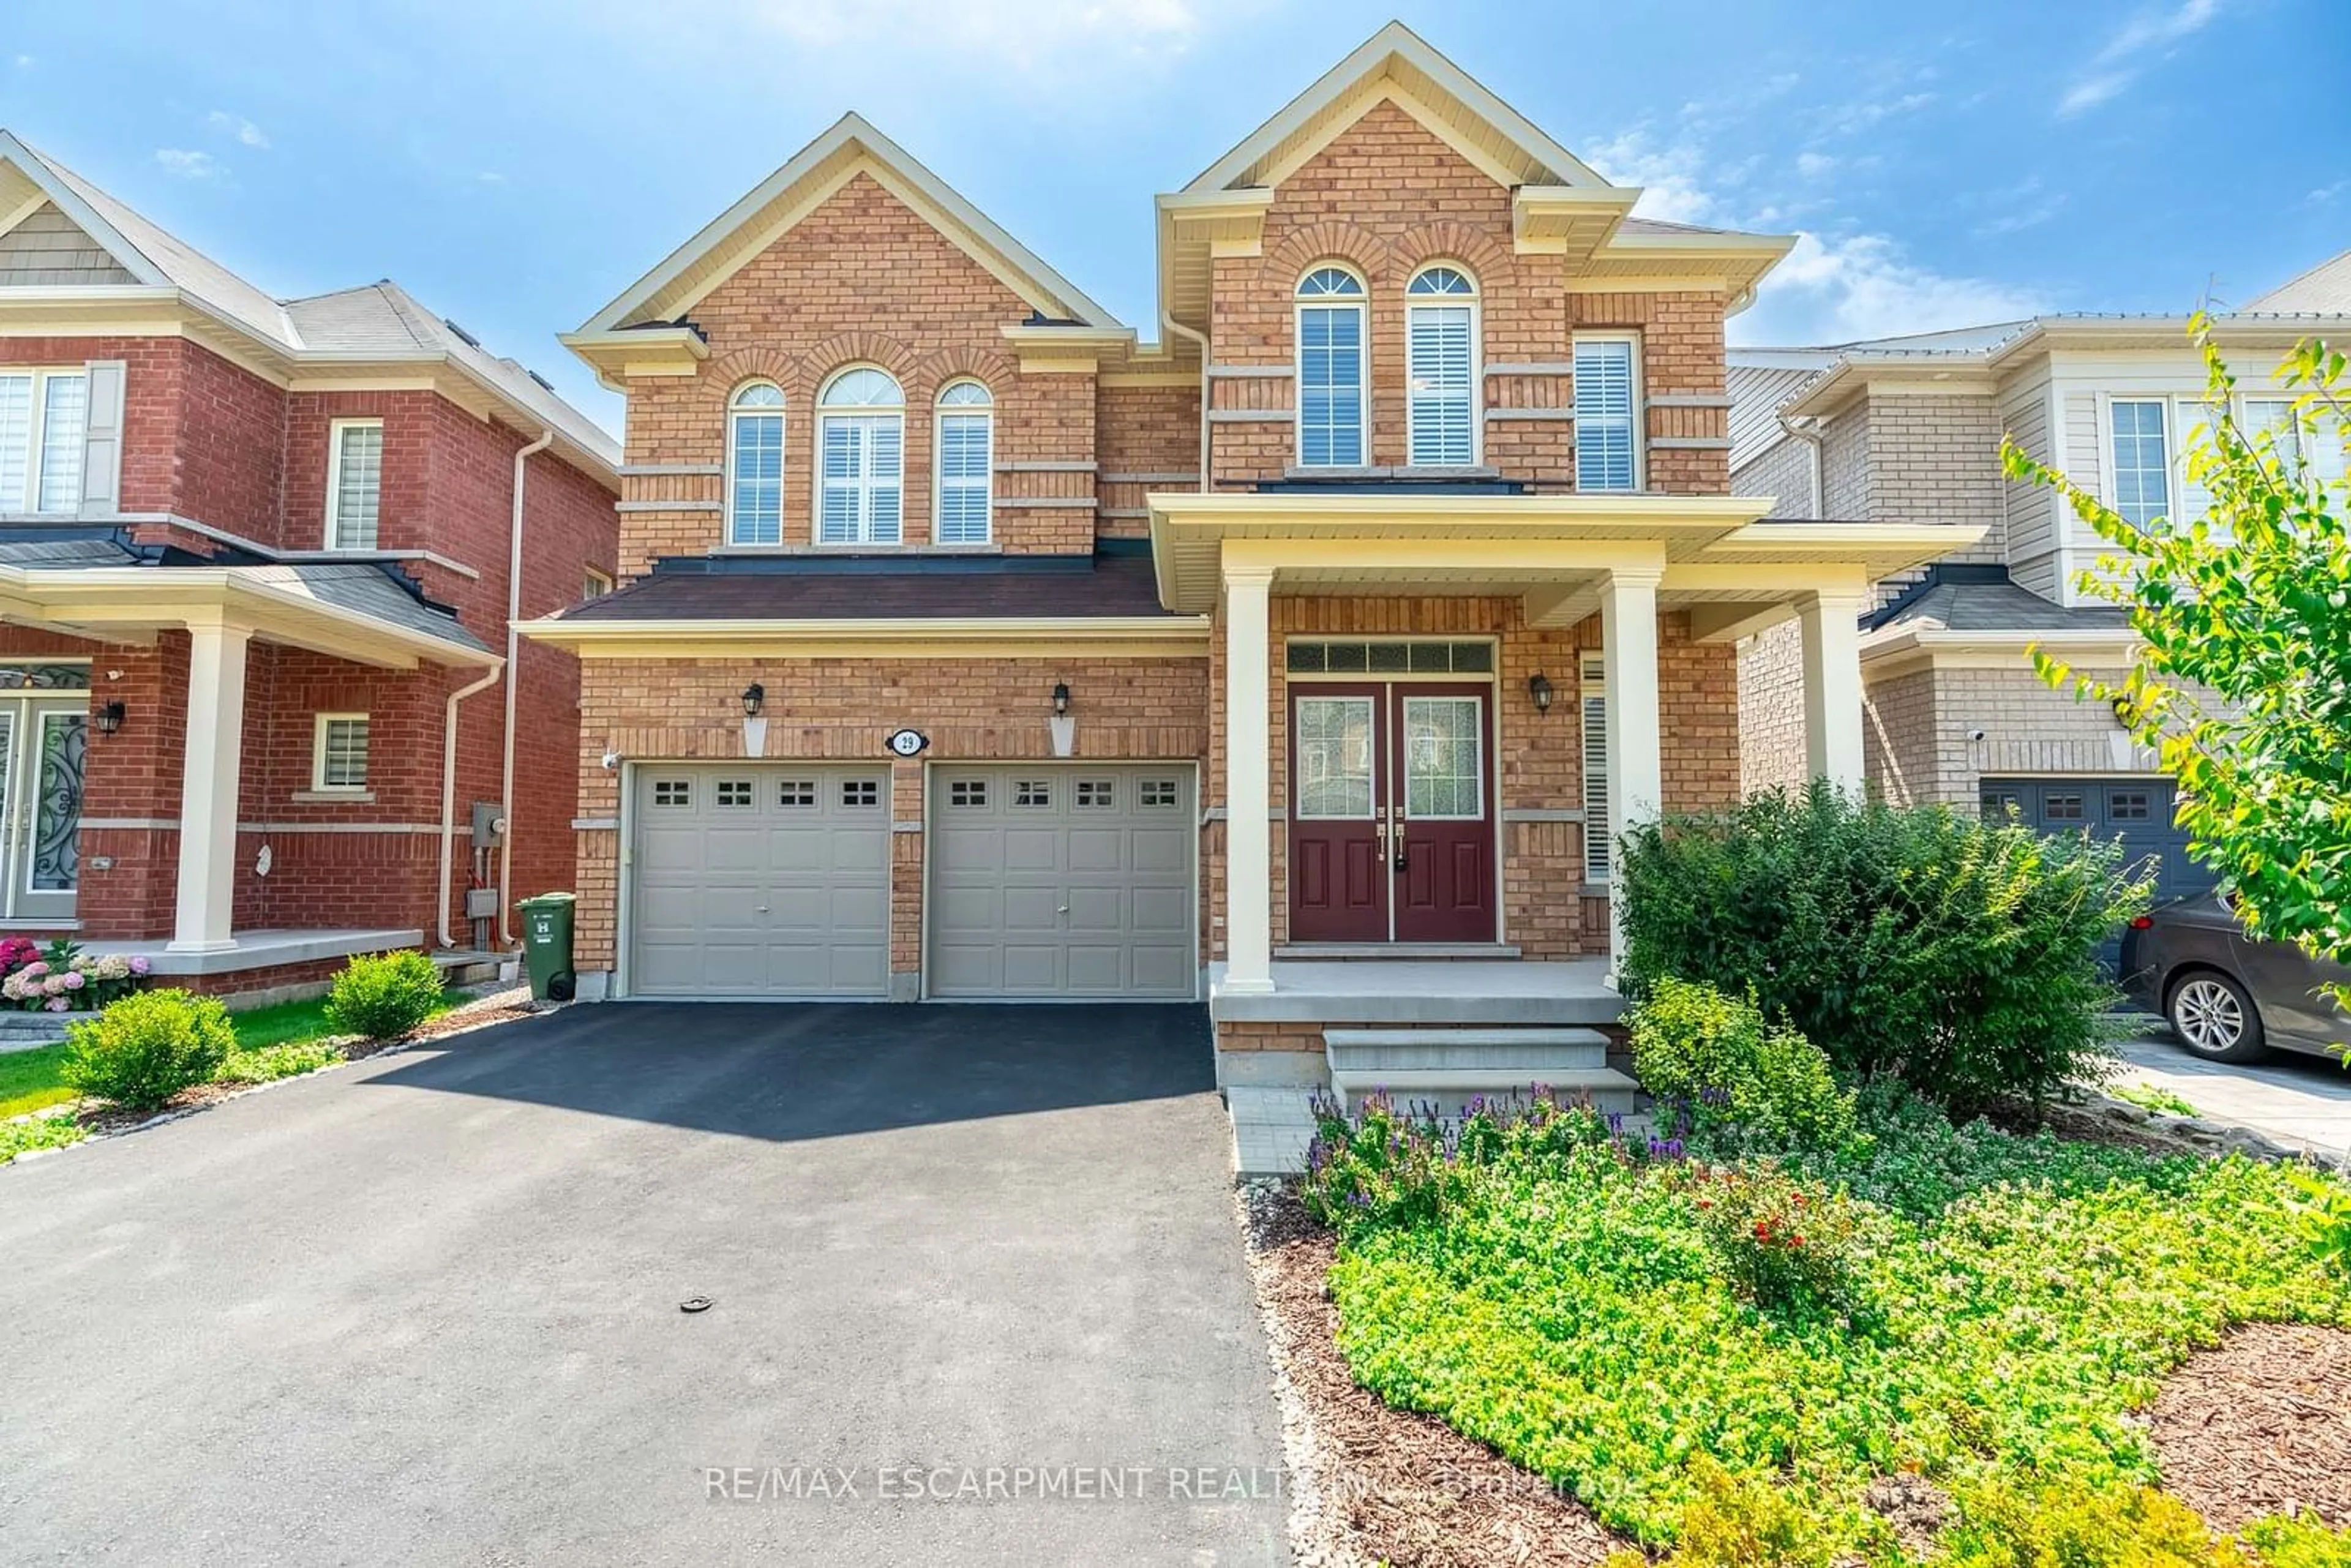 Home with brick exterior material for 29 Babcock St, Hamilton Ontario L8B 0S6